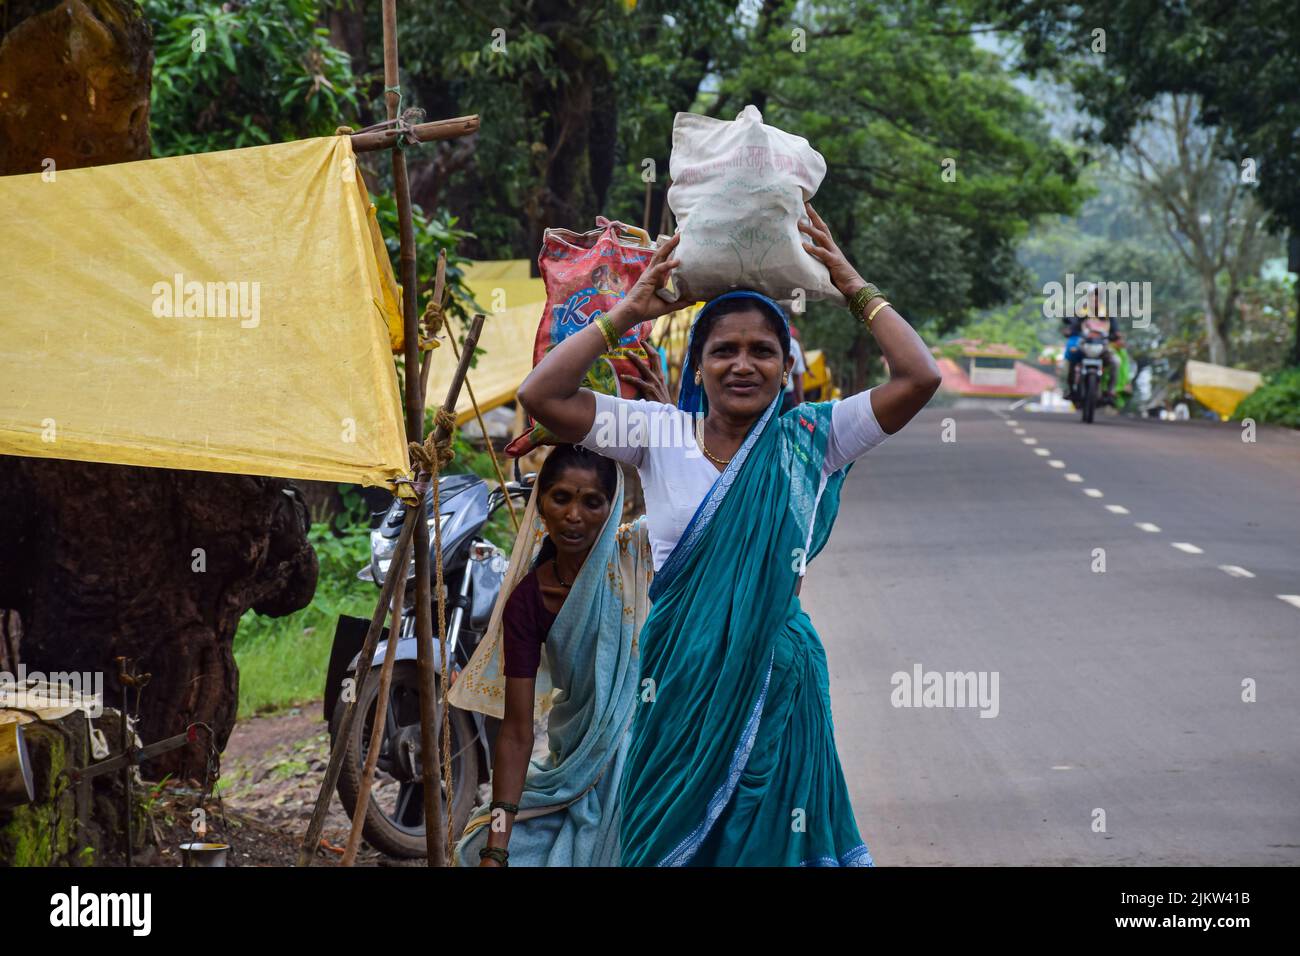 Kolhapur ,India- September 15th 2019; stock photo of 50 to 60 age group Indian women wearing saree buying groceries from street vendor in village week Stock Photo